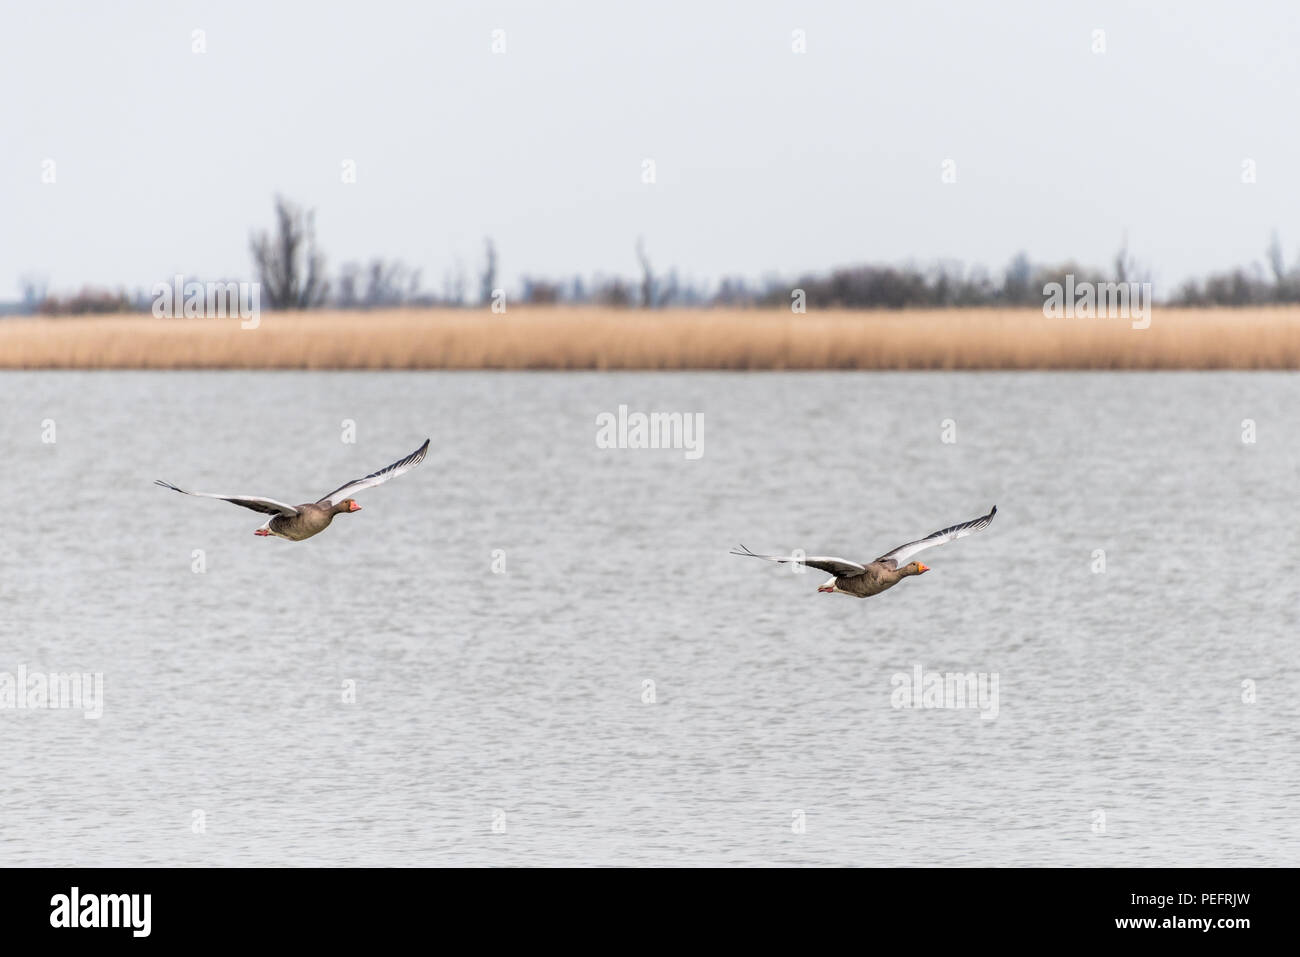 Two greylag geese are flying over the water of Oostvaardersplassen with wetlands in the background. Stock Photo